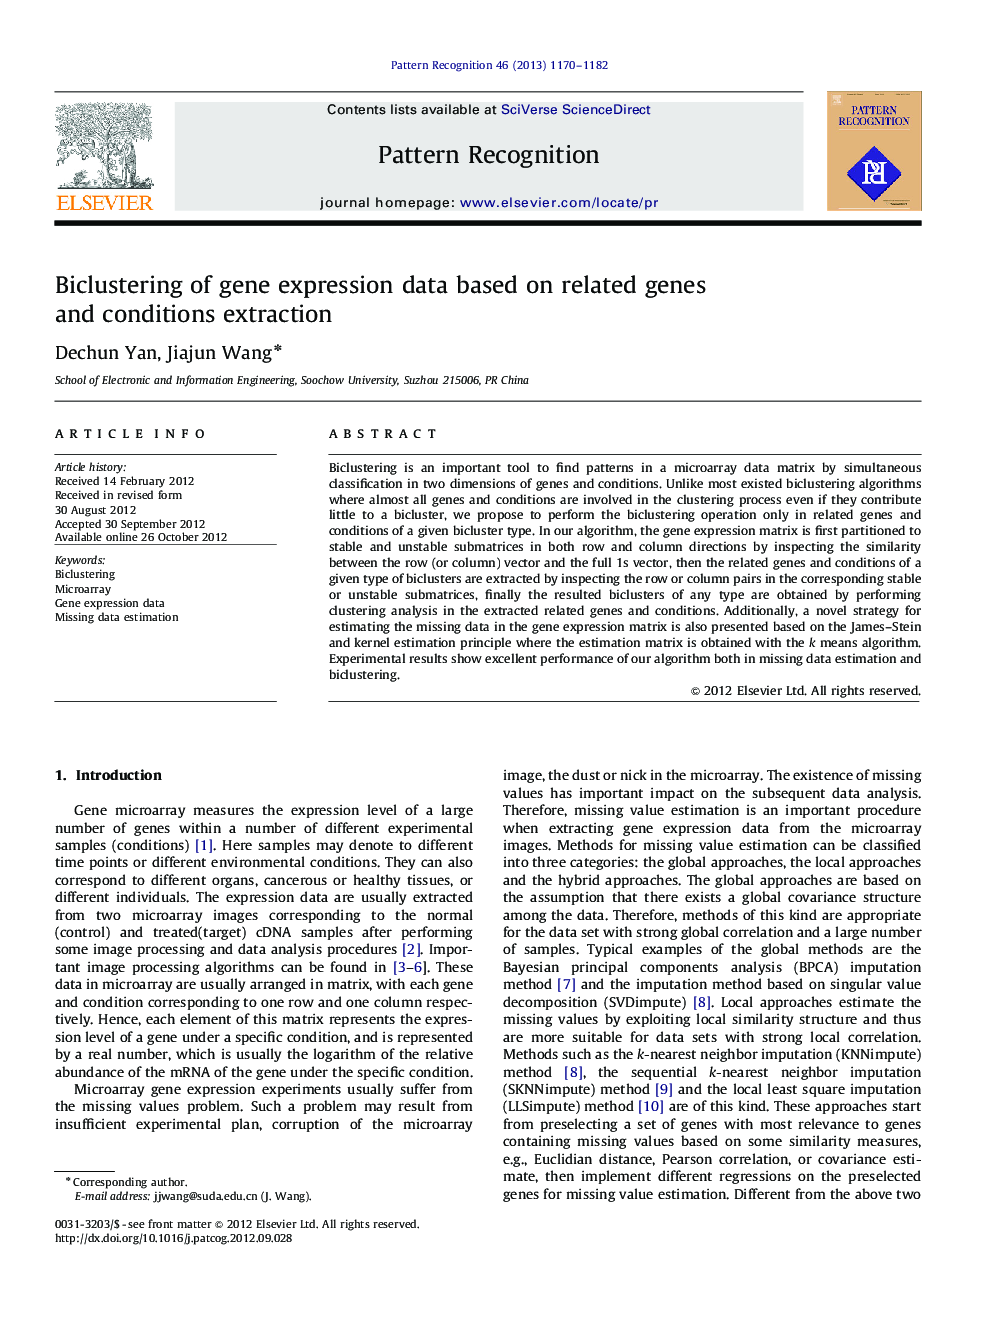 Biclustering of gene expression data based on related genes and conditions extraction